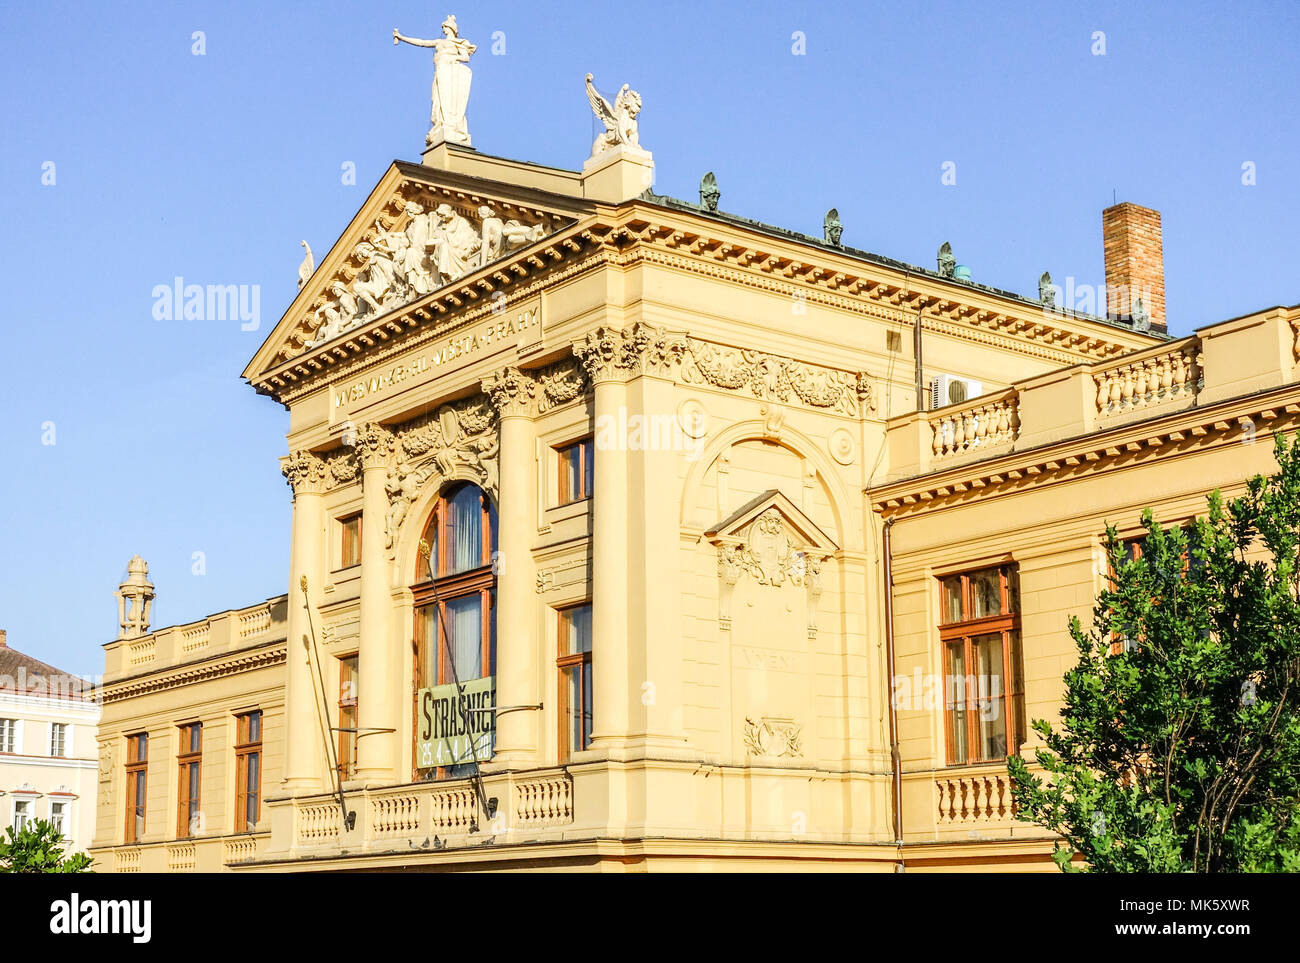 The facade of the building, Museum of the Capital City of Prague Florenc, Czech Republic Stock Photo